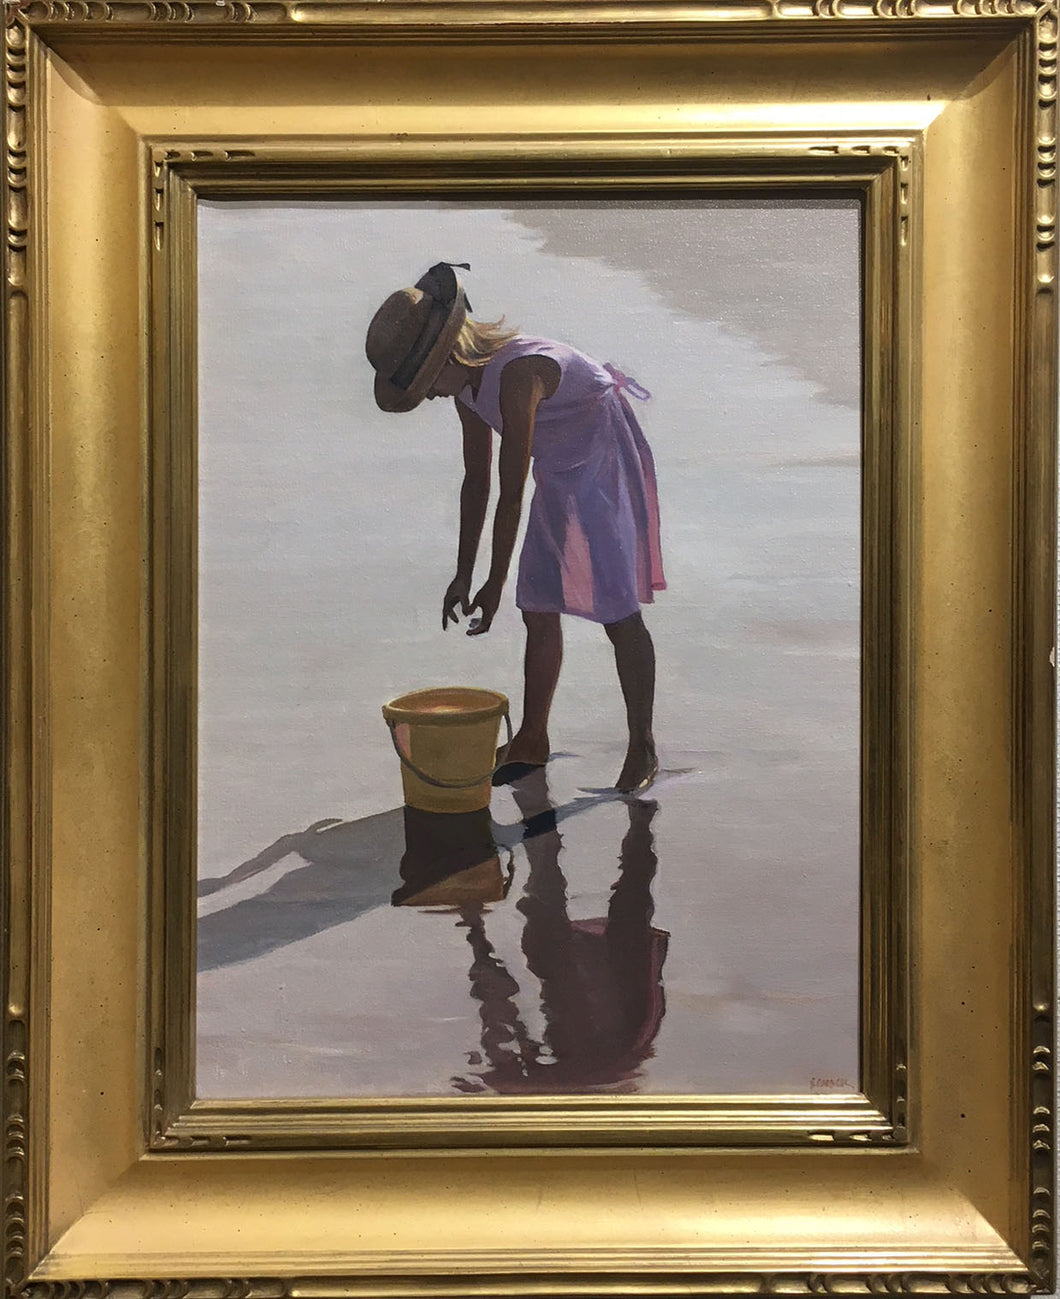 GIRL WITH PAIL By David Schock - Figurative Painting